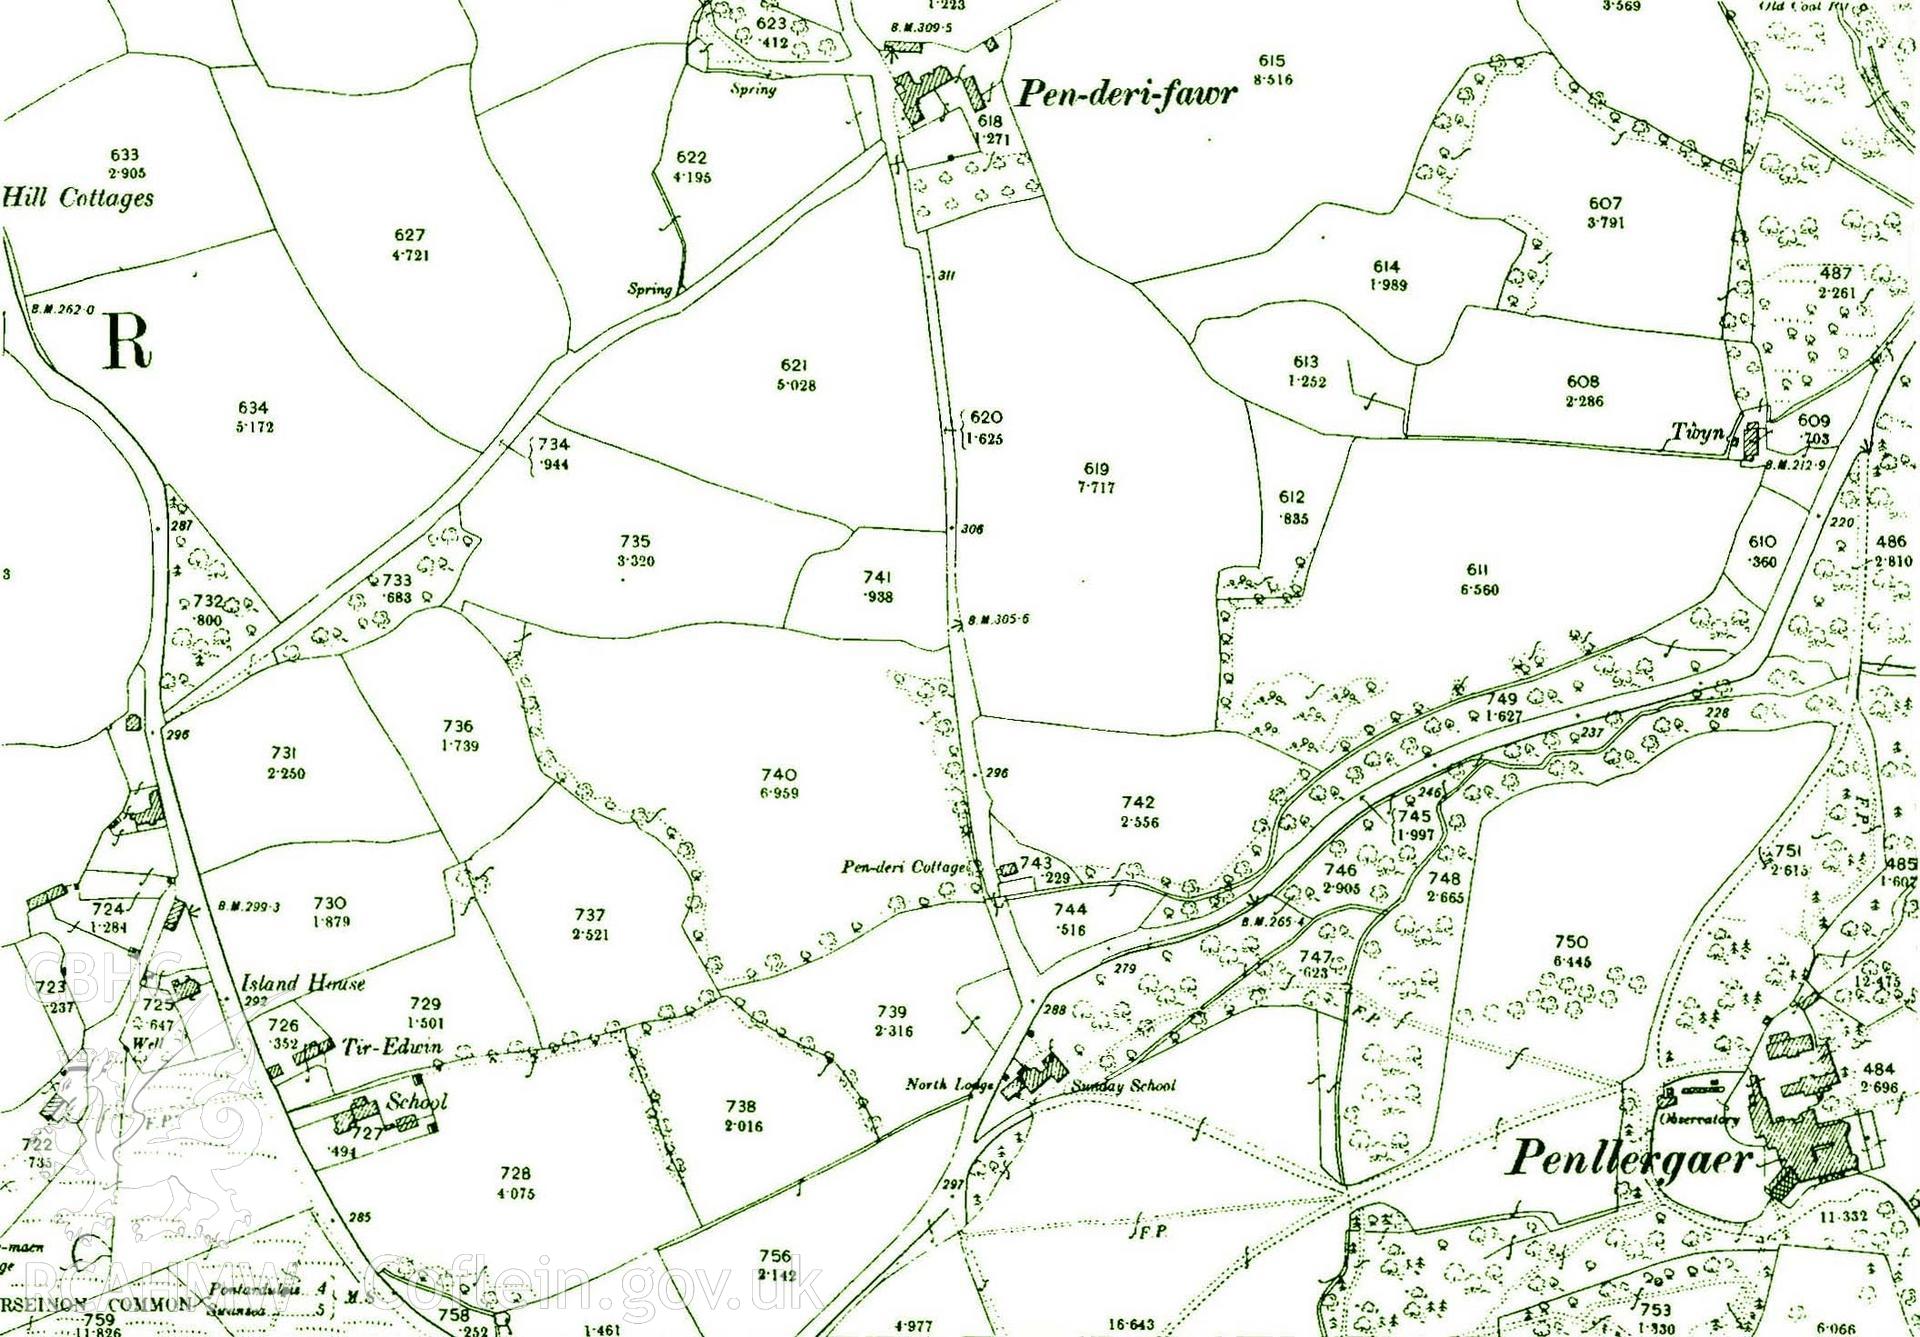 Digital copy of part of OS map sheet XIV. 7S. It depicts part of the Penllergare Estate.